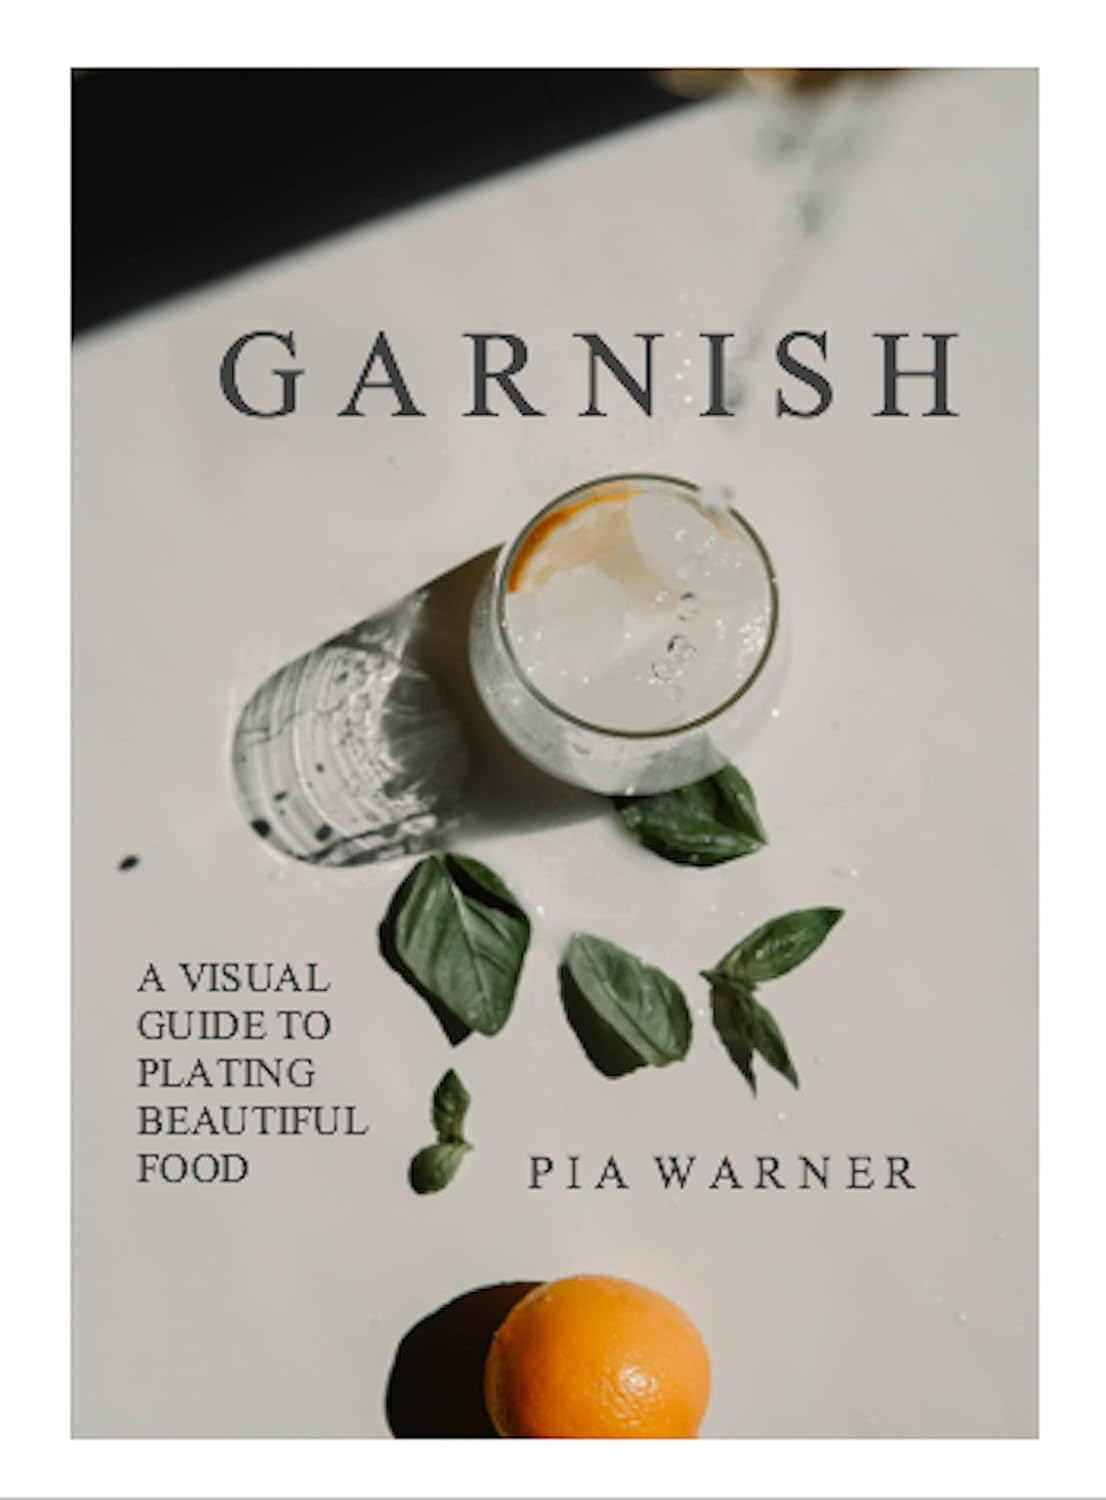 Garnish: A Simple Visual Guide to Plating Beautiful Food: Turn everyday toppings into something showstopping!  PAPERBACK! - Chef Stuff